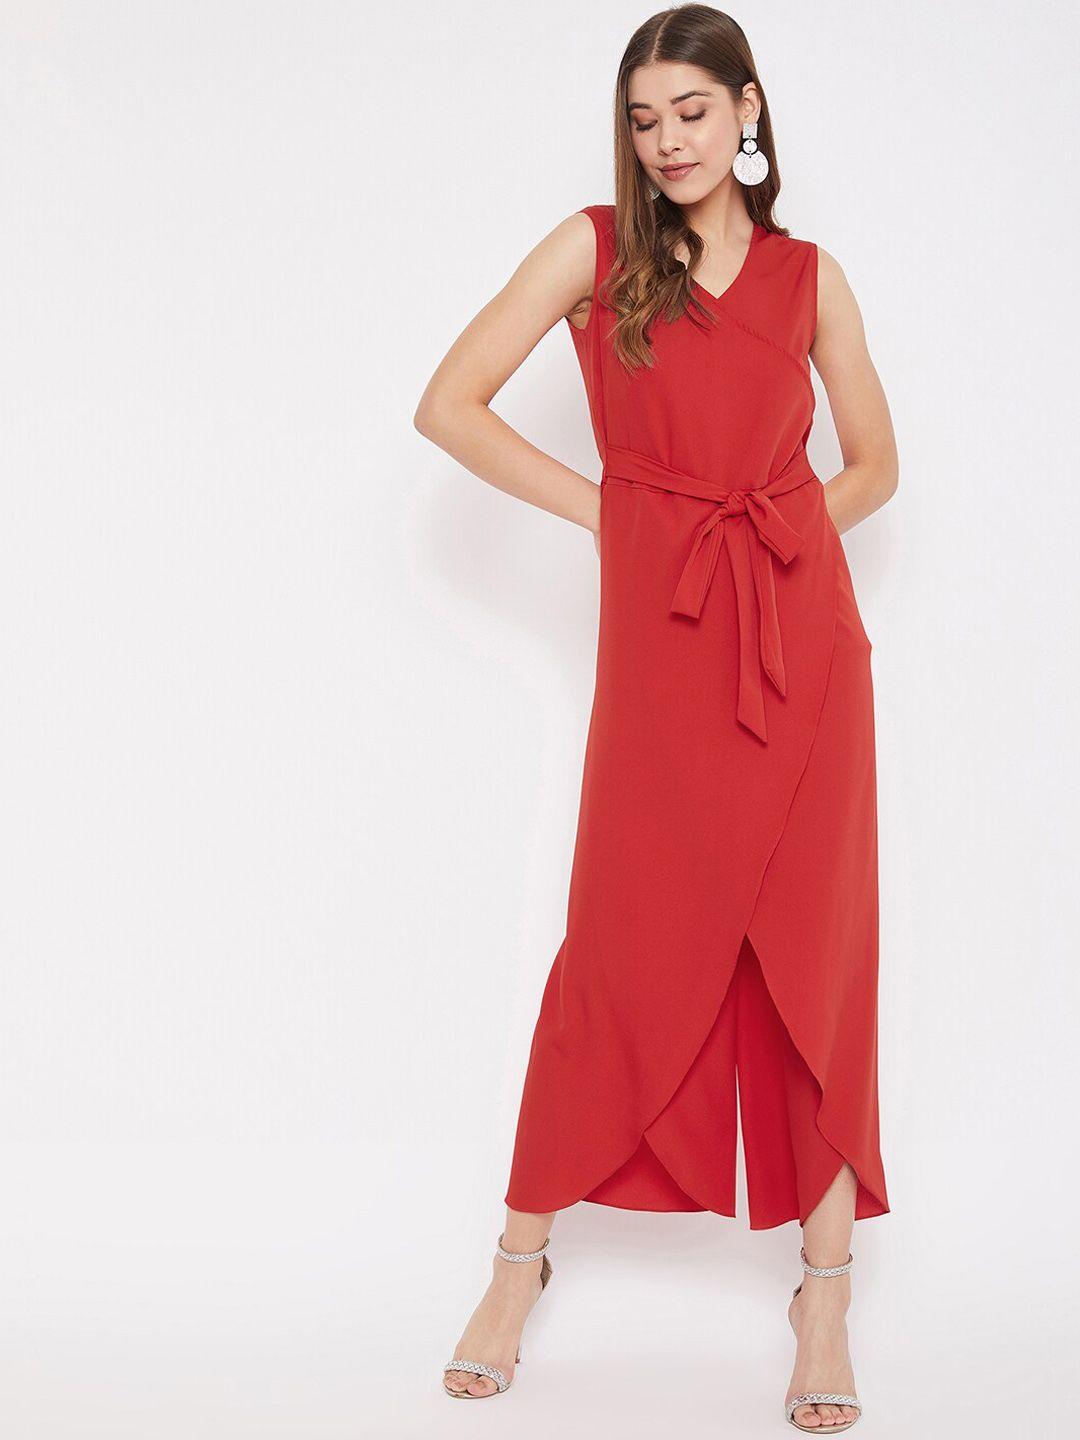 uptownie-lite-women-red-solid-relaxed-fit-sleeveless-tulip-pants-jumpsuit